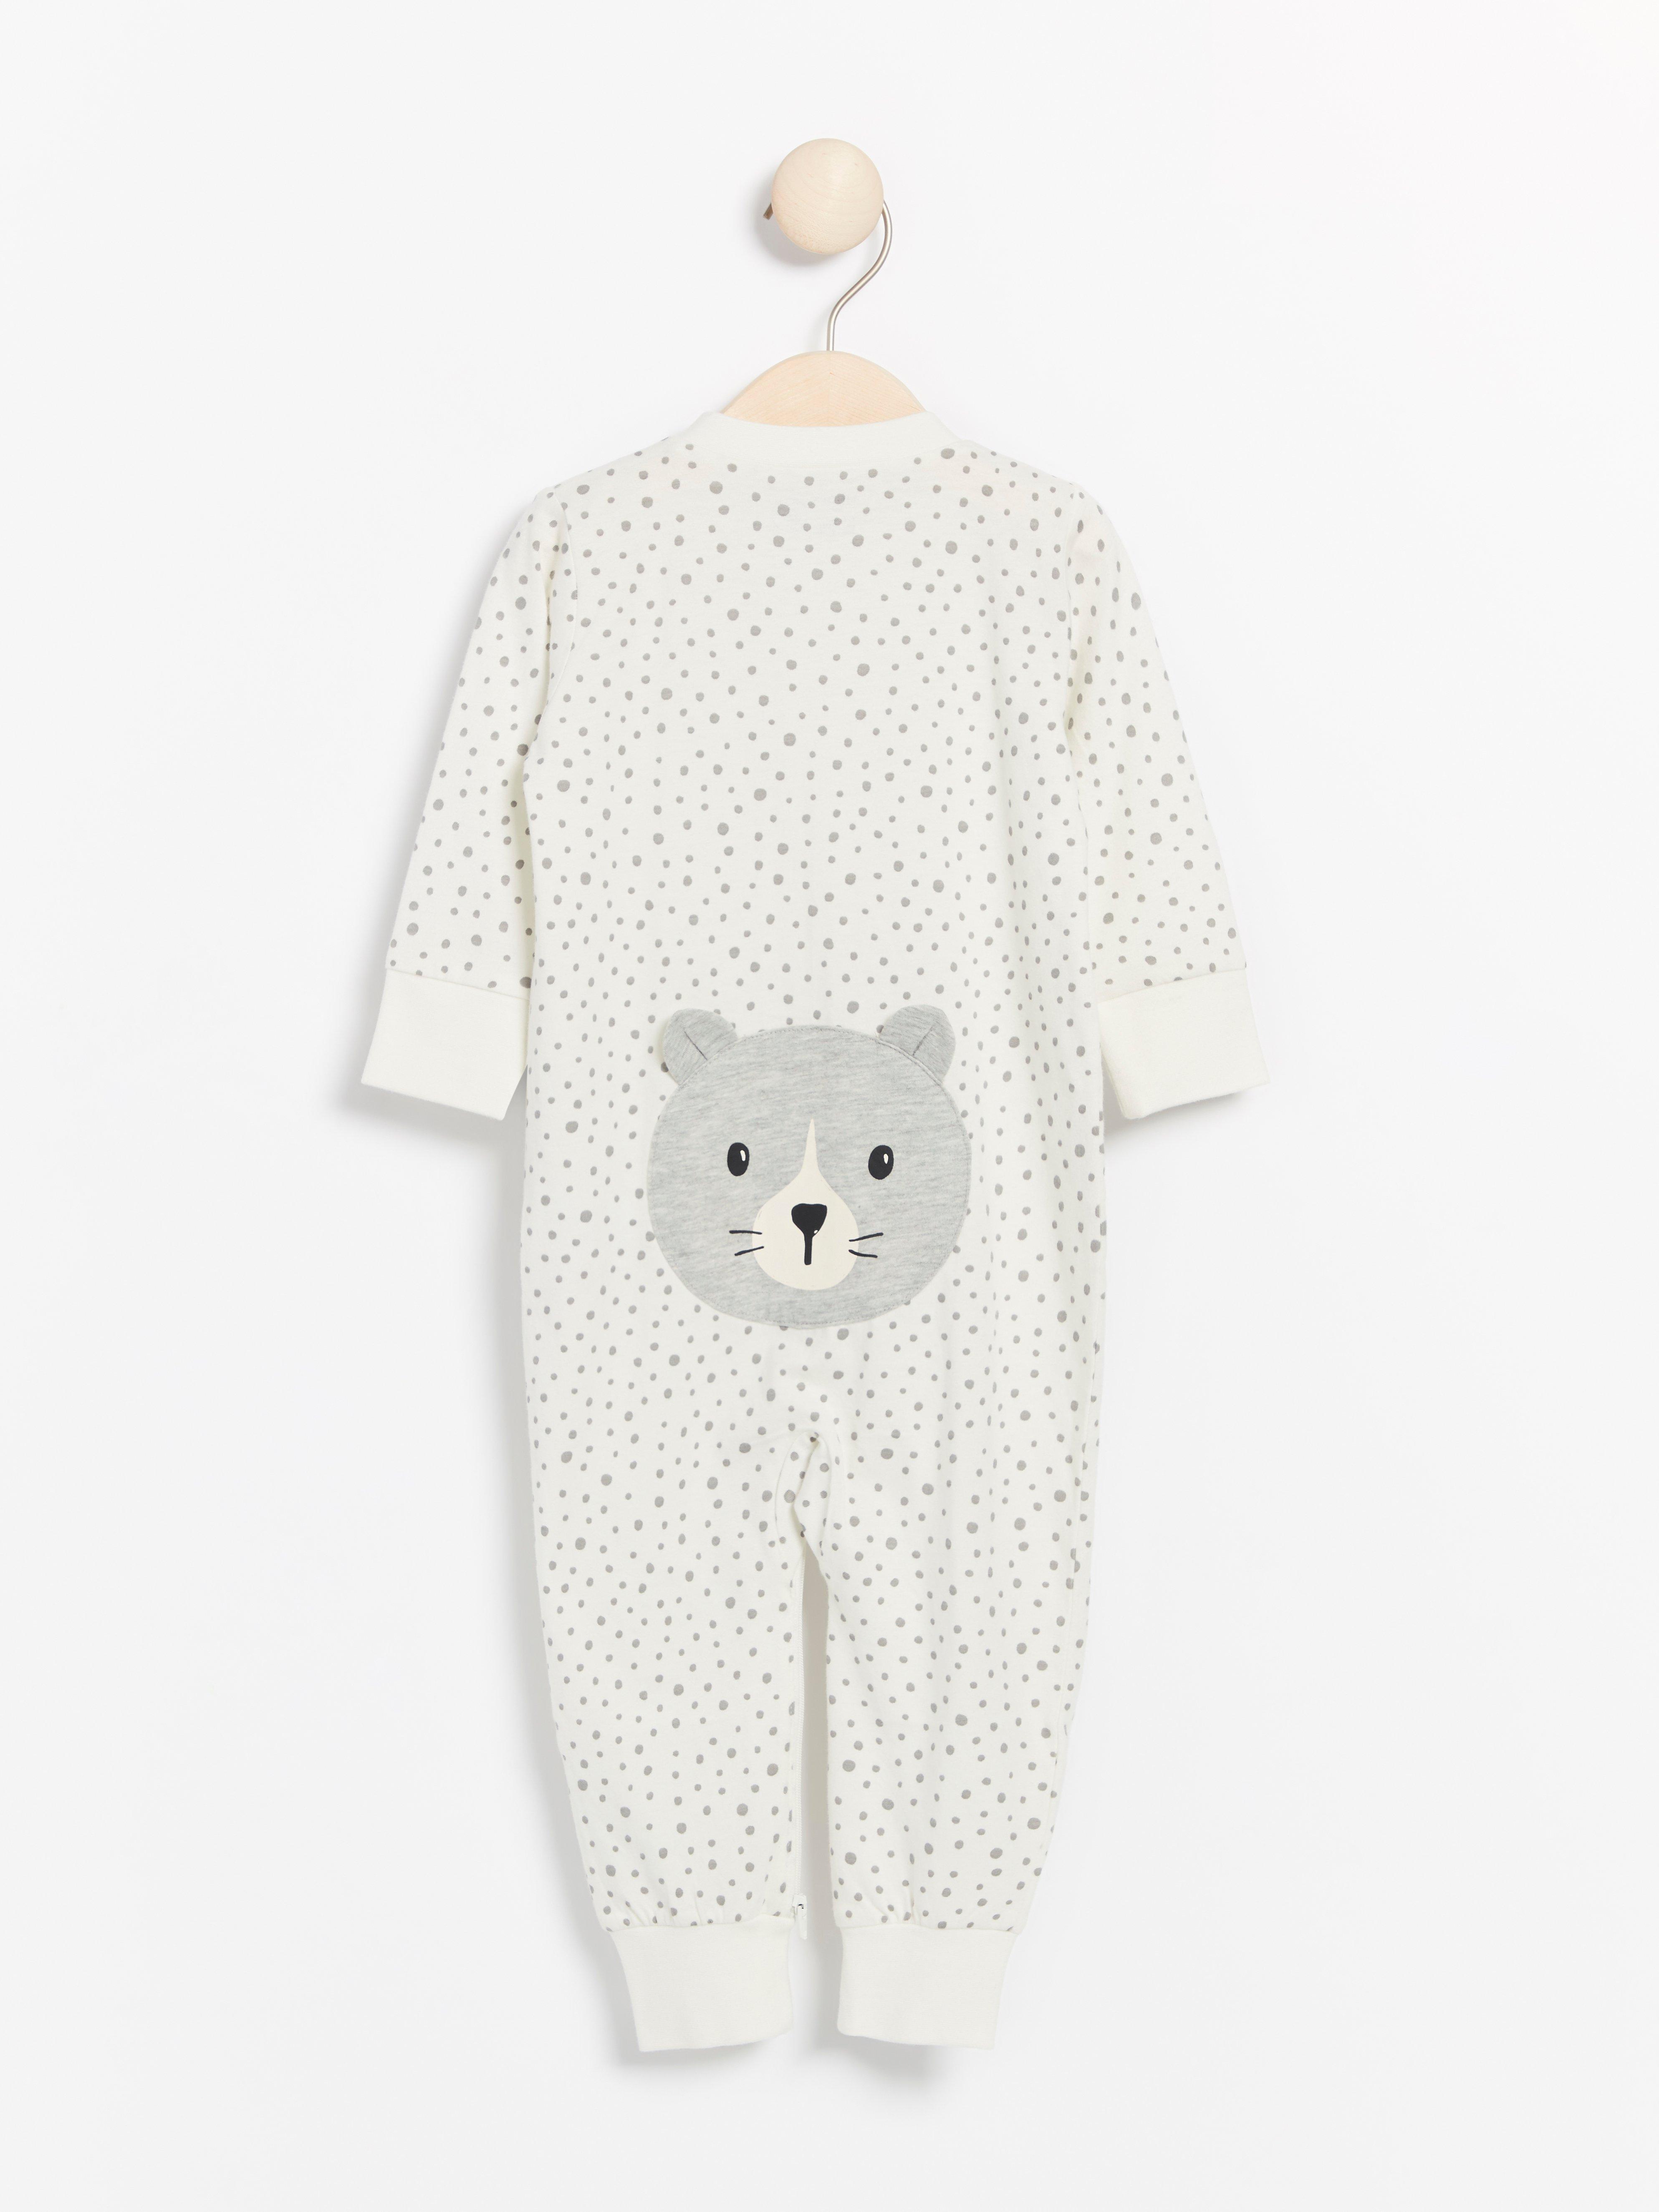 White pyjamas with grey dots and cat appliqué | Lindex Europe